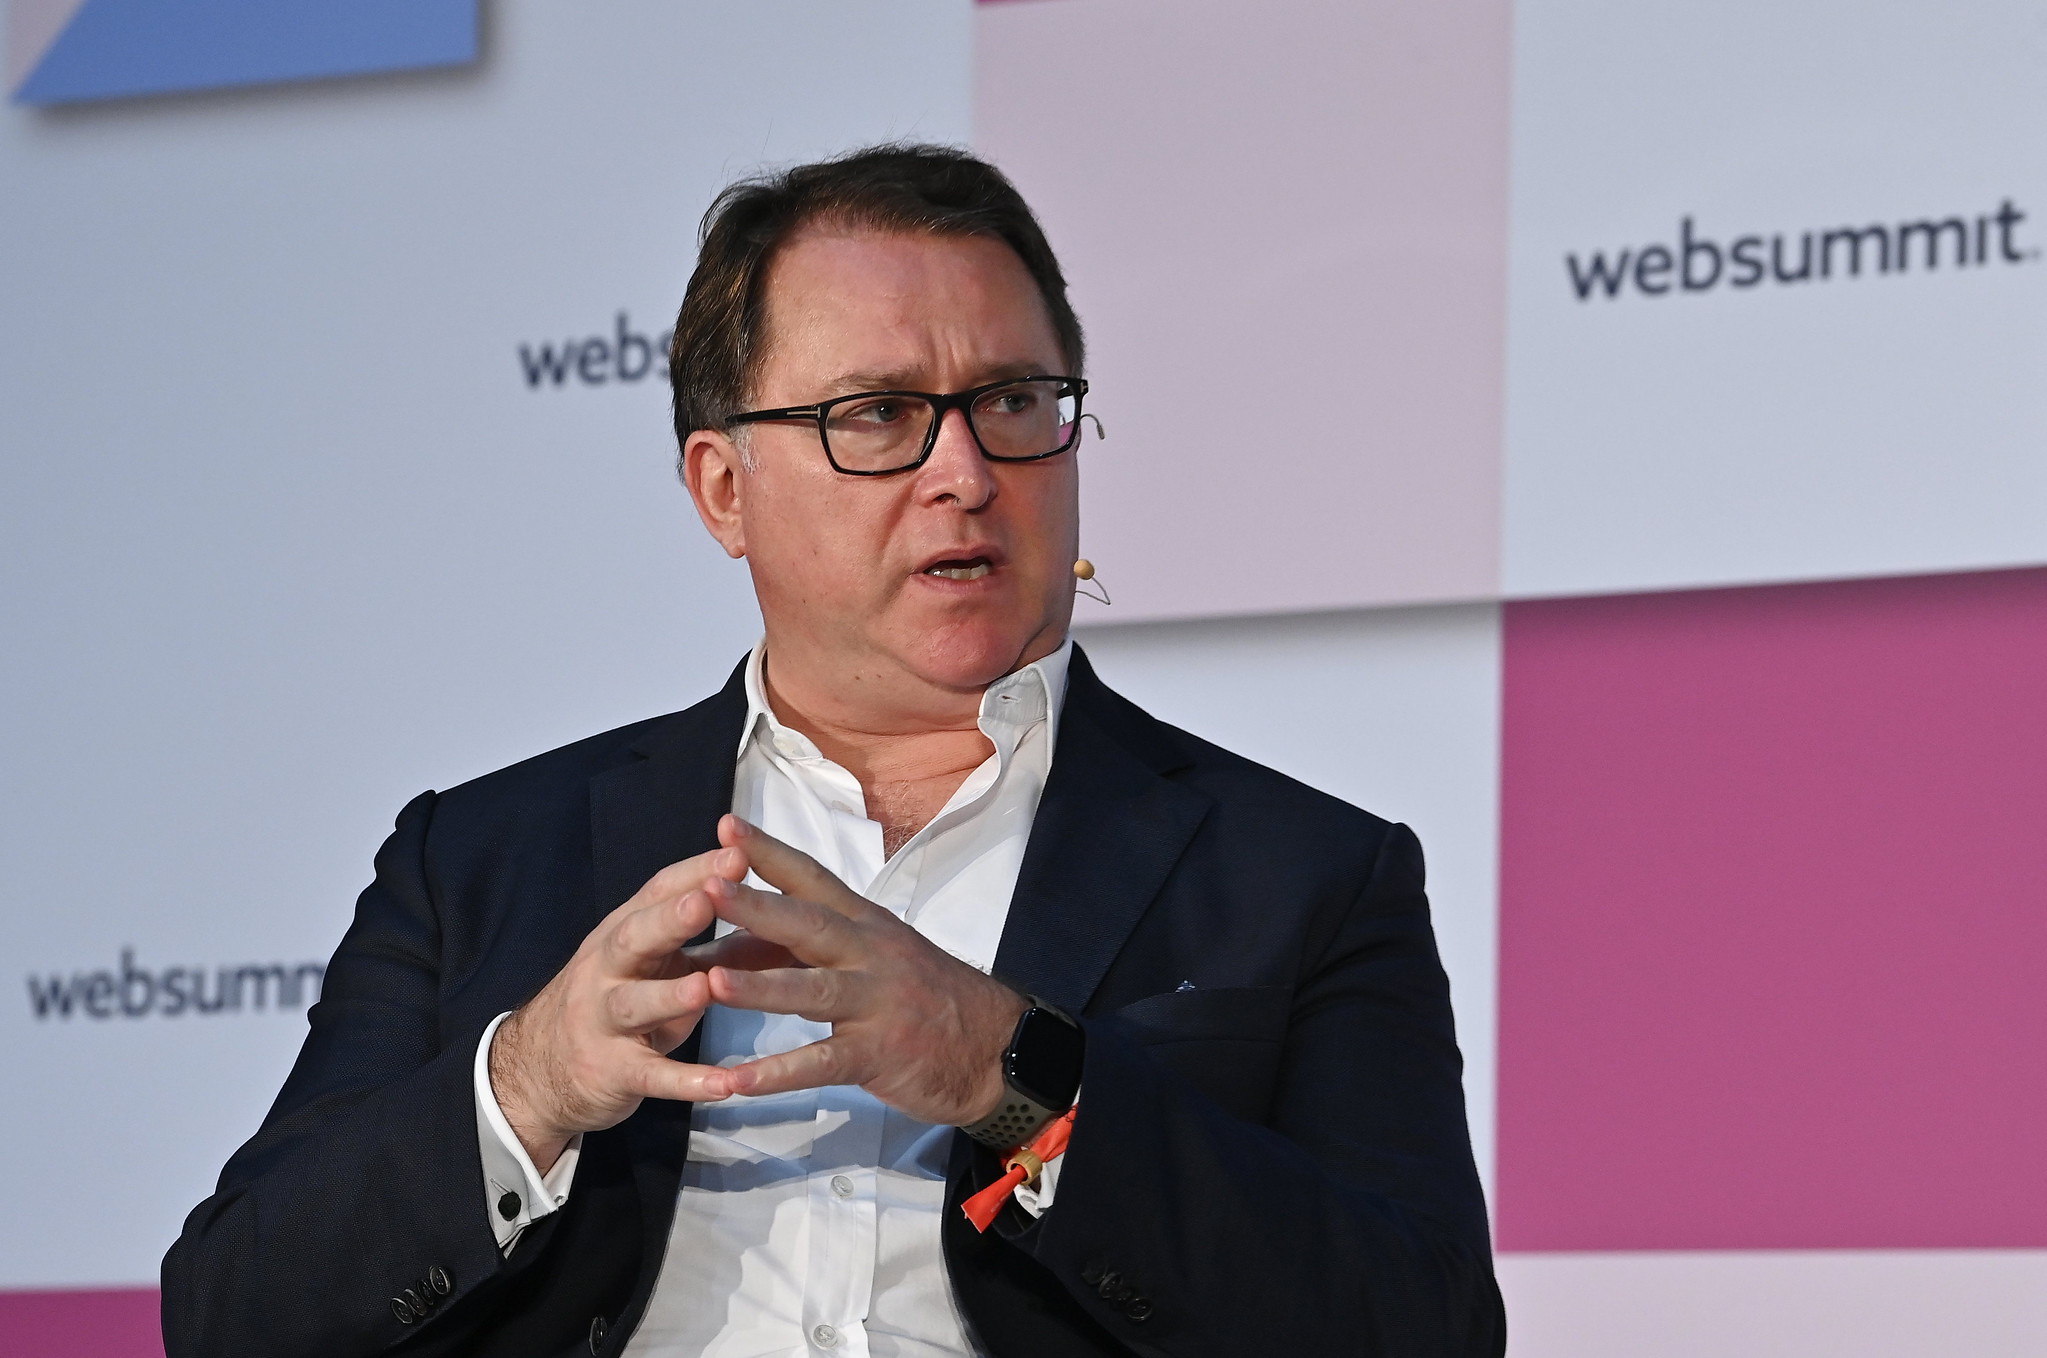 A person (DN Capital founder and managing partner Nenad Marovac) pictured from the waist up. The person is holding their fingertips together in a tented style. They are wearing a headset mic and appear to be speaking. The Web Summit logo is visible in several places on the wall behind them.